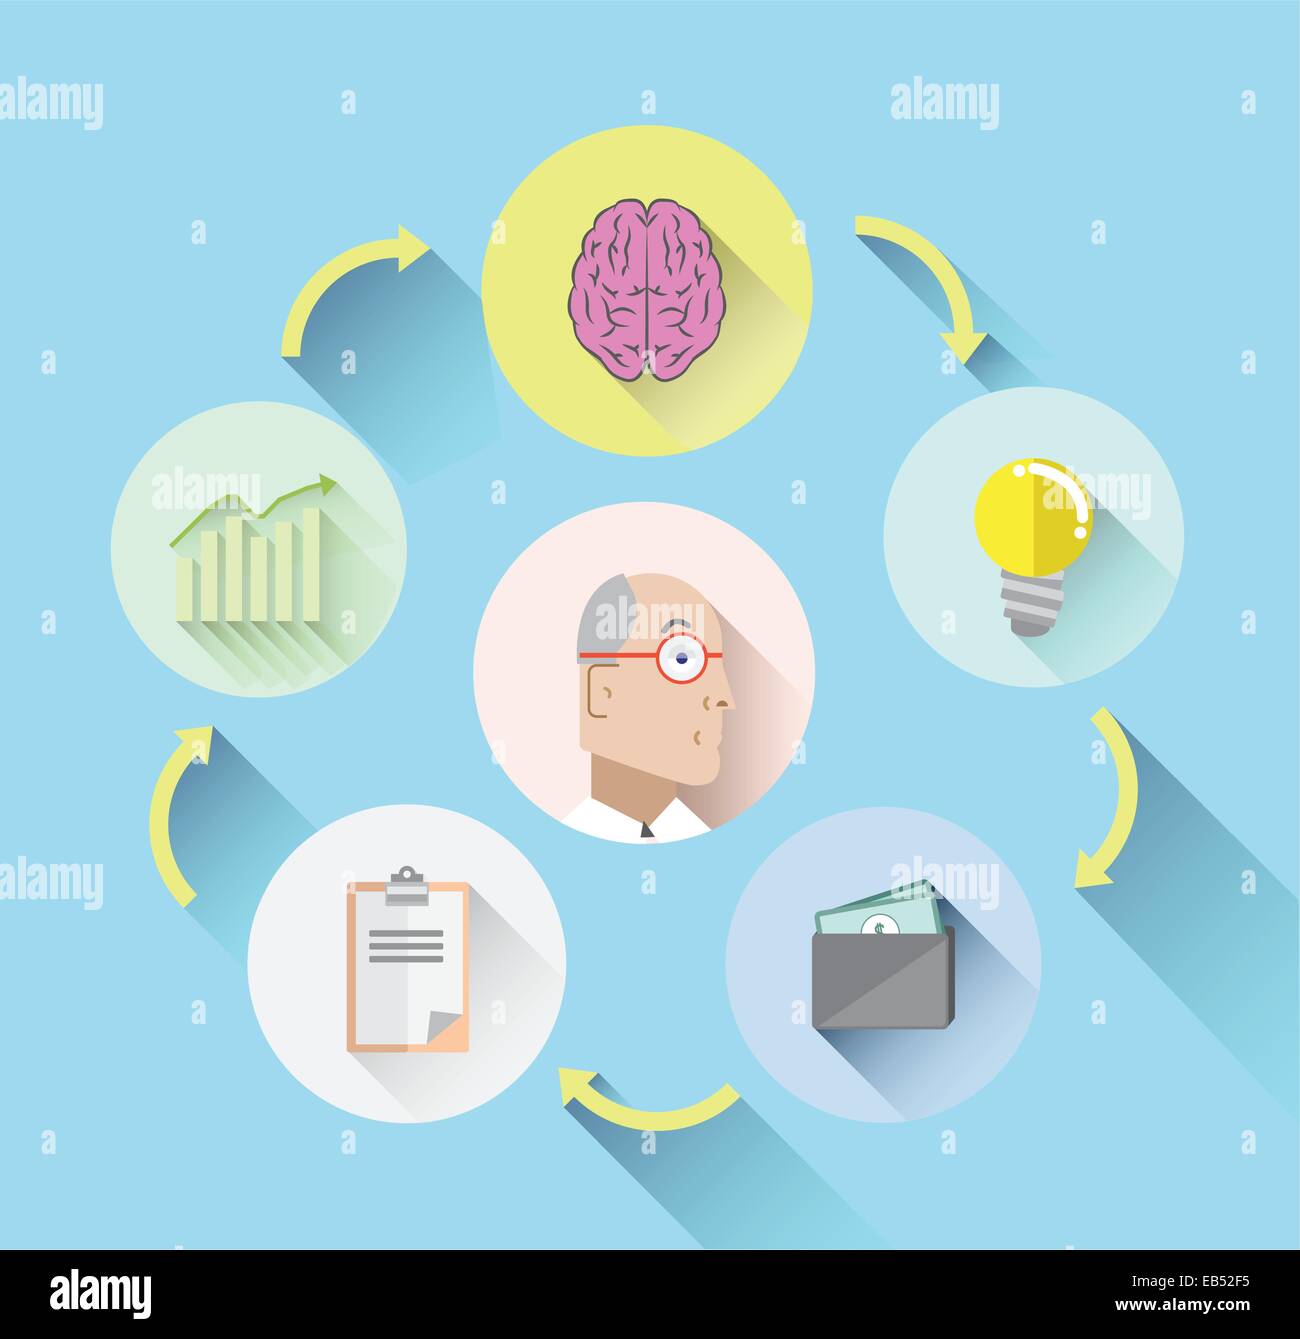 Businessmans thought process concept on blue Stock Vector